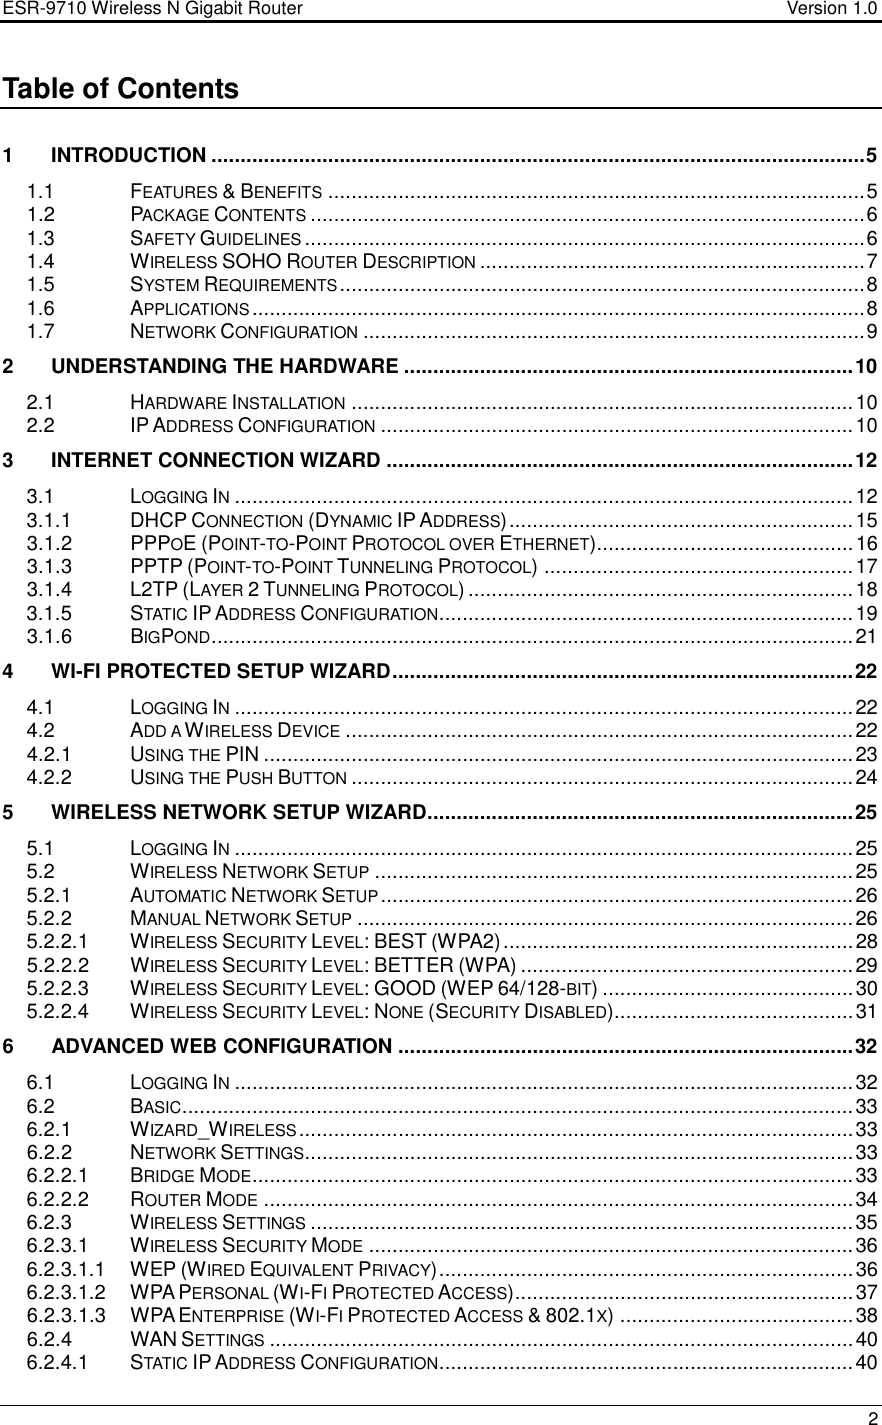 ESR-9710 Wireless N Gigabit Router                                    Version 1.0    2  Table of Contents  1 INTRODUCTION ................................................................................................................5 1.1  FEATURES &amp; BENEFITS............................................................................................5 1.2  PACKAGE CONTENTS...............................................................................................6 1.3  SAFETY GUIDELINES................................................................................................6 1.4  WIRELESS SOHO ROUTER DESCRIPTION..................................................................7 1.5  SYSTEM REQUIREMENTS..........................................................................................8 1.6  APPLICATIONS.........................................................................................................8 1.7  NETWORK CONFIGURATION......................................................................................9 2 UNDERSTANDING THE HARDWARE .............................................................................10 2.1  HARDWARE INSTALLATION......................................................................................10 2.2  IP ADDRESS CONFIGURATION.................................................................................10 3 INTERNET CONNECTION WIZARD ................................................................................12 3.1  LOGGING IN..........................................................................................................12 3.1.1  DHCP CONNECTION (DYNAMIC IP ADDRESS)...........................................................15 3.1.2  PPPOE (POINT-TO-POINT PROTOCOL OVER ETHERNET)............................................16 3.1.3  PPTP (POINT-TO-POINT TUNNELING PROTOCOL) .....................................................17 3.1.4  L2TP (LAYER 2 TUNNELING PROTOCOL) ..................................................................18 3.1.5  STATIC IP ADDRESS CONFIGURATION.......................................................................19 3.1.6  BIGPOND..............................................................................................................21 4 WI-FI PROTECTED SETUP WIZARD...............................................................................22 4.1  LOGGING IN..........................................................................................................22 4.2  ADD A WIRELESS DEVICE.......................................................................................22 4.2.1  USING THE PIN .....................................................................................................23 4.2.2  USING THE PUSH BUTTON......................................................................................24 5 WIRELESS NETWORK SETUP WIZARD.........................................................................25 5.1  LOGGING IN..........................................................................................................25 5.2  WIRELESS NETWORK SETUP..................................................................................25 5.2.1  AUTOMATIC NETWORK SETUP.................................................................................26 5.2.2  MANUAL NETWORK SETUP.....................................................................................26 5.2.2.1  WIRELESS SECURITY LEVEL: BEST (WPA2)............................................................28 5.2.2.2  WIRELESS SECURITY LEVEL: BETTER (WPA) .........................................................29 5.2.2.3  WIRELESS SECURITY LEVEL: GOOD (WEP 64/128-BIT) ...........................................30 5.2.2.4  WIRELESS SECURITY LEVEL: NONE (SECURITY DISABLED).........................................31 6 ADVANCED WEB CONFIGURATION ..............................................................................32 6.1  LOGGING IN..........................................................................................................32 6.2  BASIC...................................................................................................................33 6.2.1  WIZARD_WIRELESS...............................................................................................33 6.2.2  NETWORK SETTINGS..............................................................................................33 6.2.2.1  BRIDGE MODE.......................................................................................................33 6.2.2.2  ROUTER MODE.....................................................................................................34 6.2.3  WIRELESS SETTINGS.............................................................................................35 6.2.3.1  WIRELESS SECURITY MODE...................................................................................36 6.2.3.1.1  WEP (WIRED EQUIVALENT PRIVACY).......................................................................36 6.2.3.1.2  WPA PERSONAL (WI-FI PROTECTED ACCESS)..........................................................37 6.2.3.1.3  WPA ENTERPRISE (WI-FI PROTECTED ACCESS &amp; 802.1X) ........................................38 6.2.4  WAN SETTINGS....................................................................................................40 6.2.4.1  STATIC IP ADDRESS CONFIGURATION.......................................................................40 